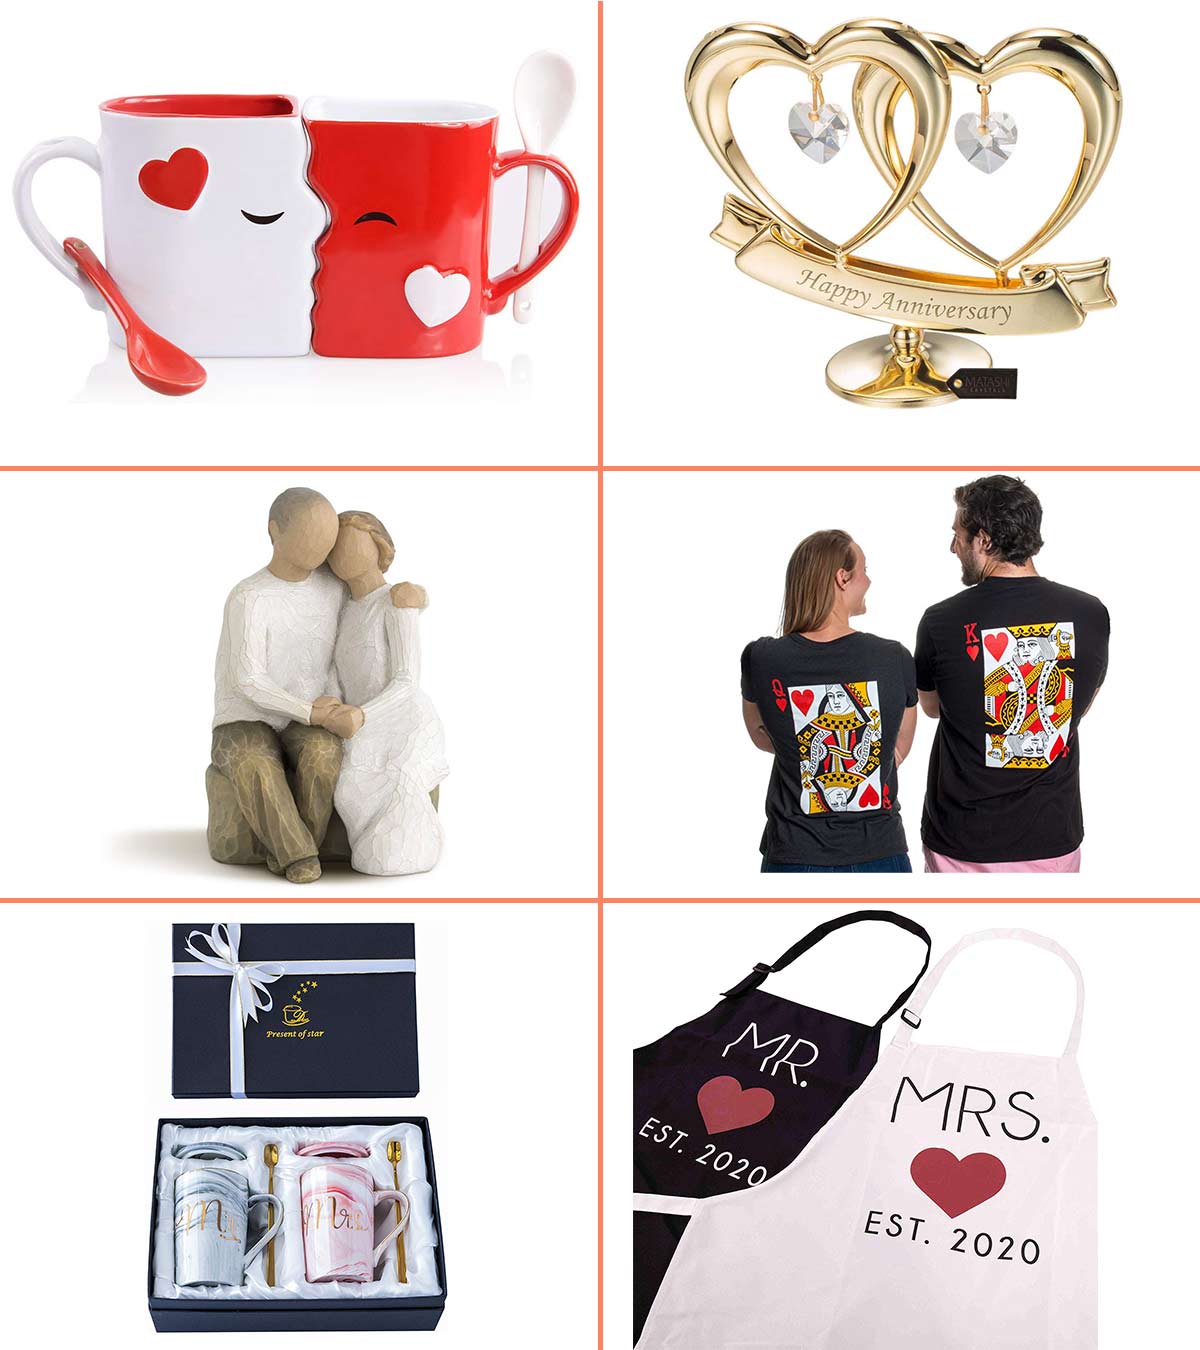 23 Best Wedding Anniversary Gifts In 2021 Giving your husband a special gift of some of your photographs together will be great anniversary gift ideas for husband. 23 best wedding anniversary gifts in 2021